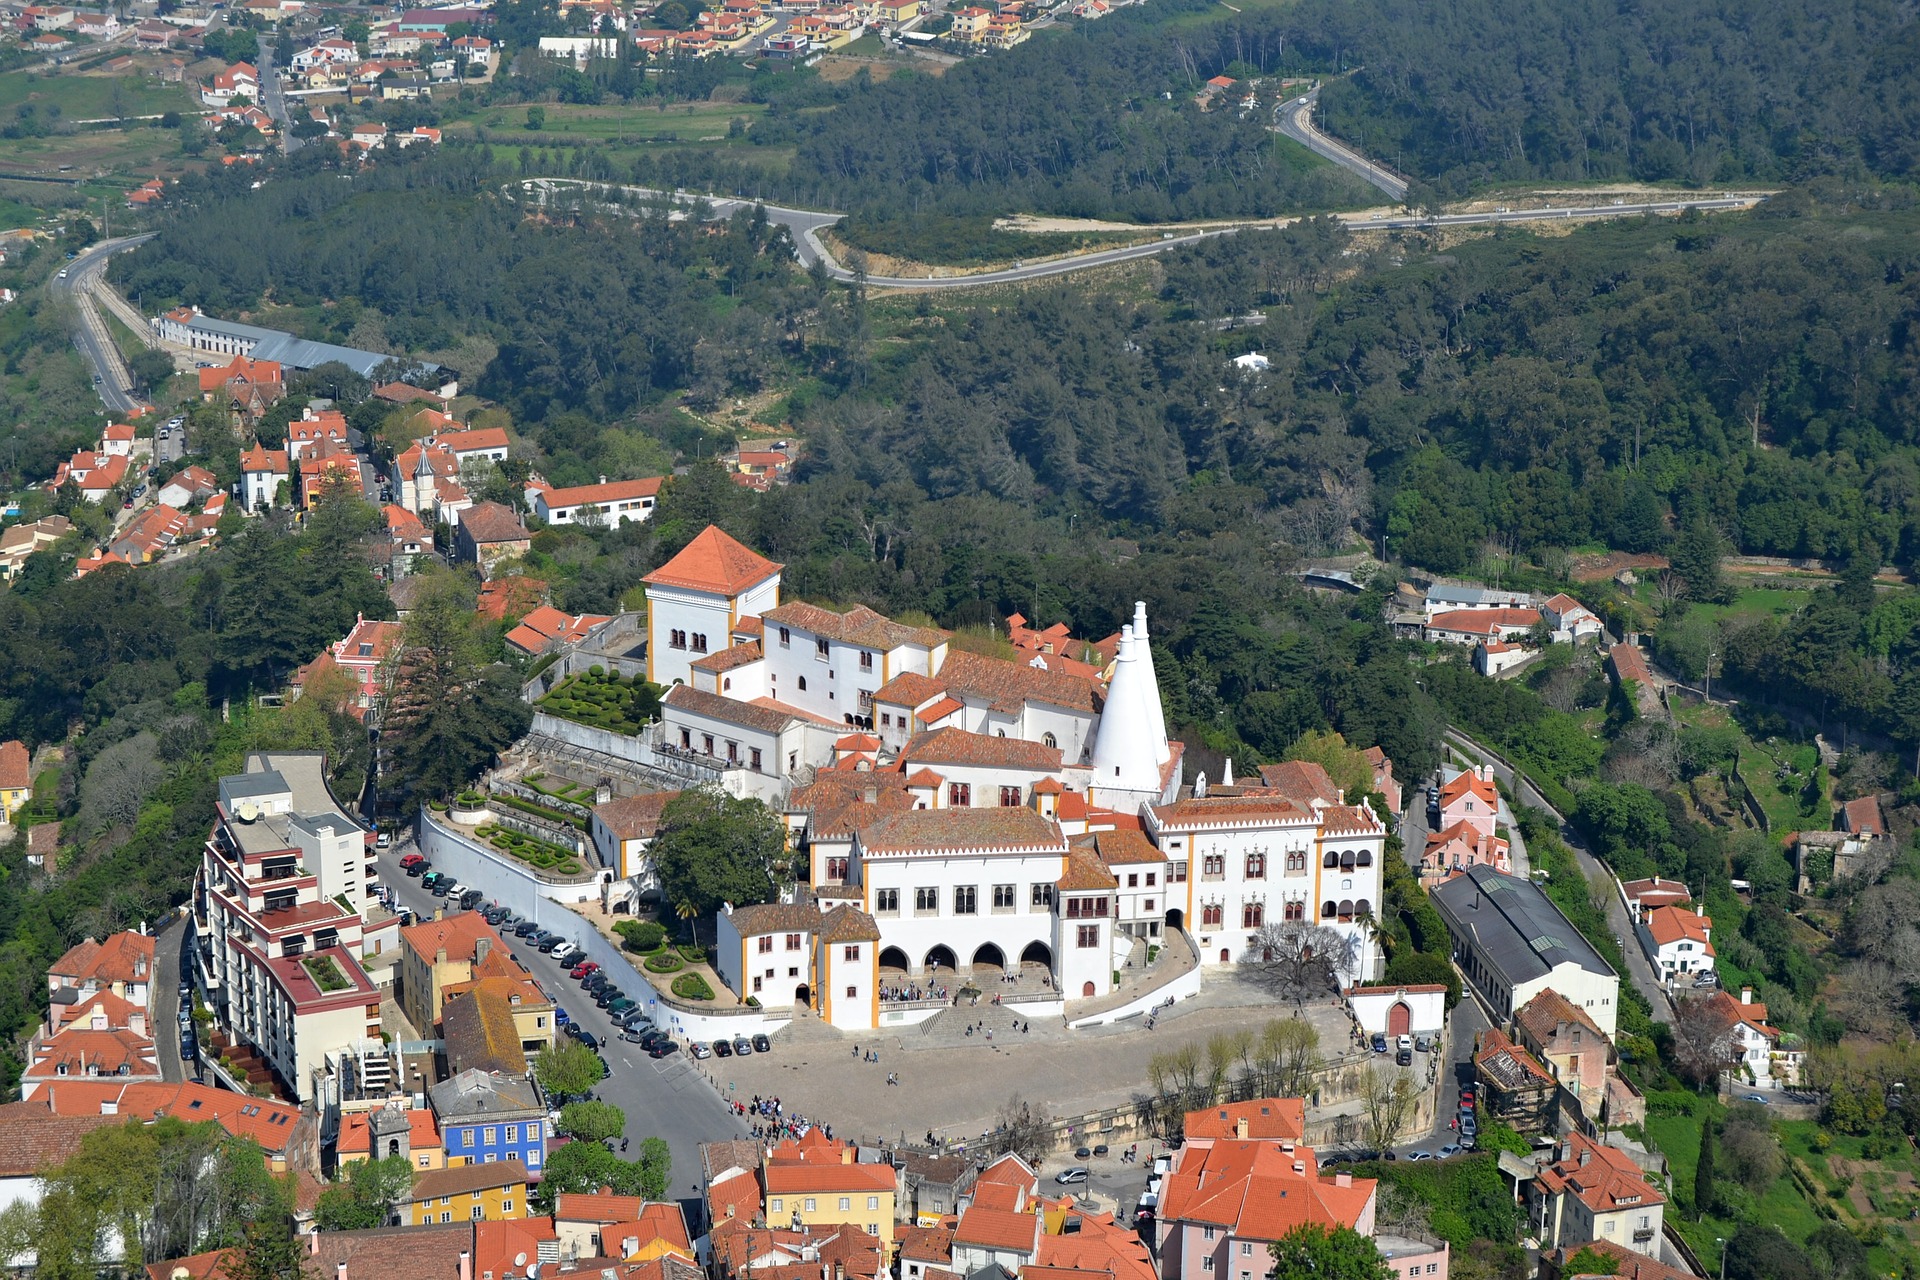 Sintra, a magical place just 30 min from Lisbon